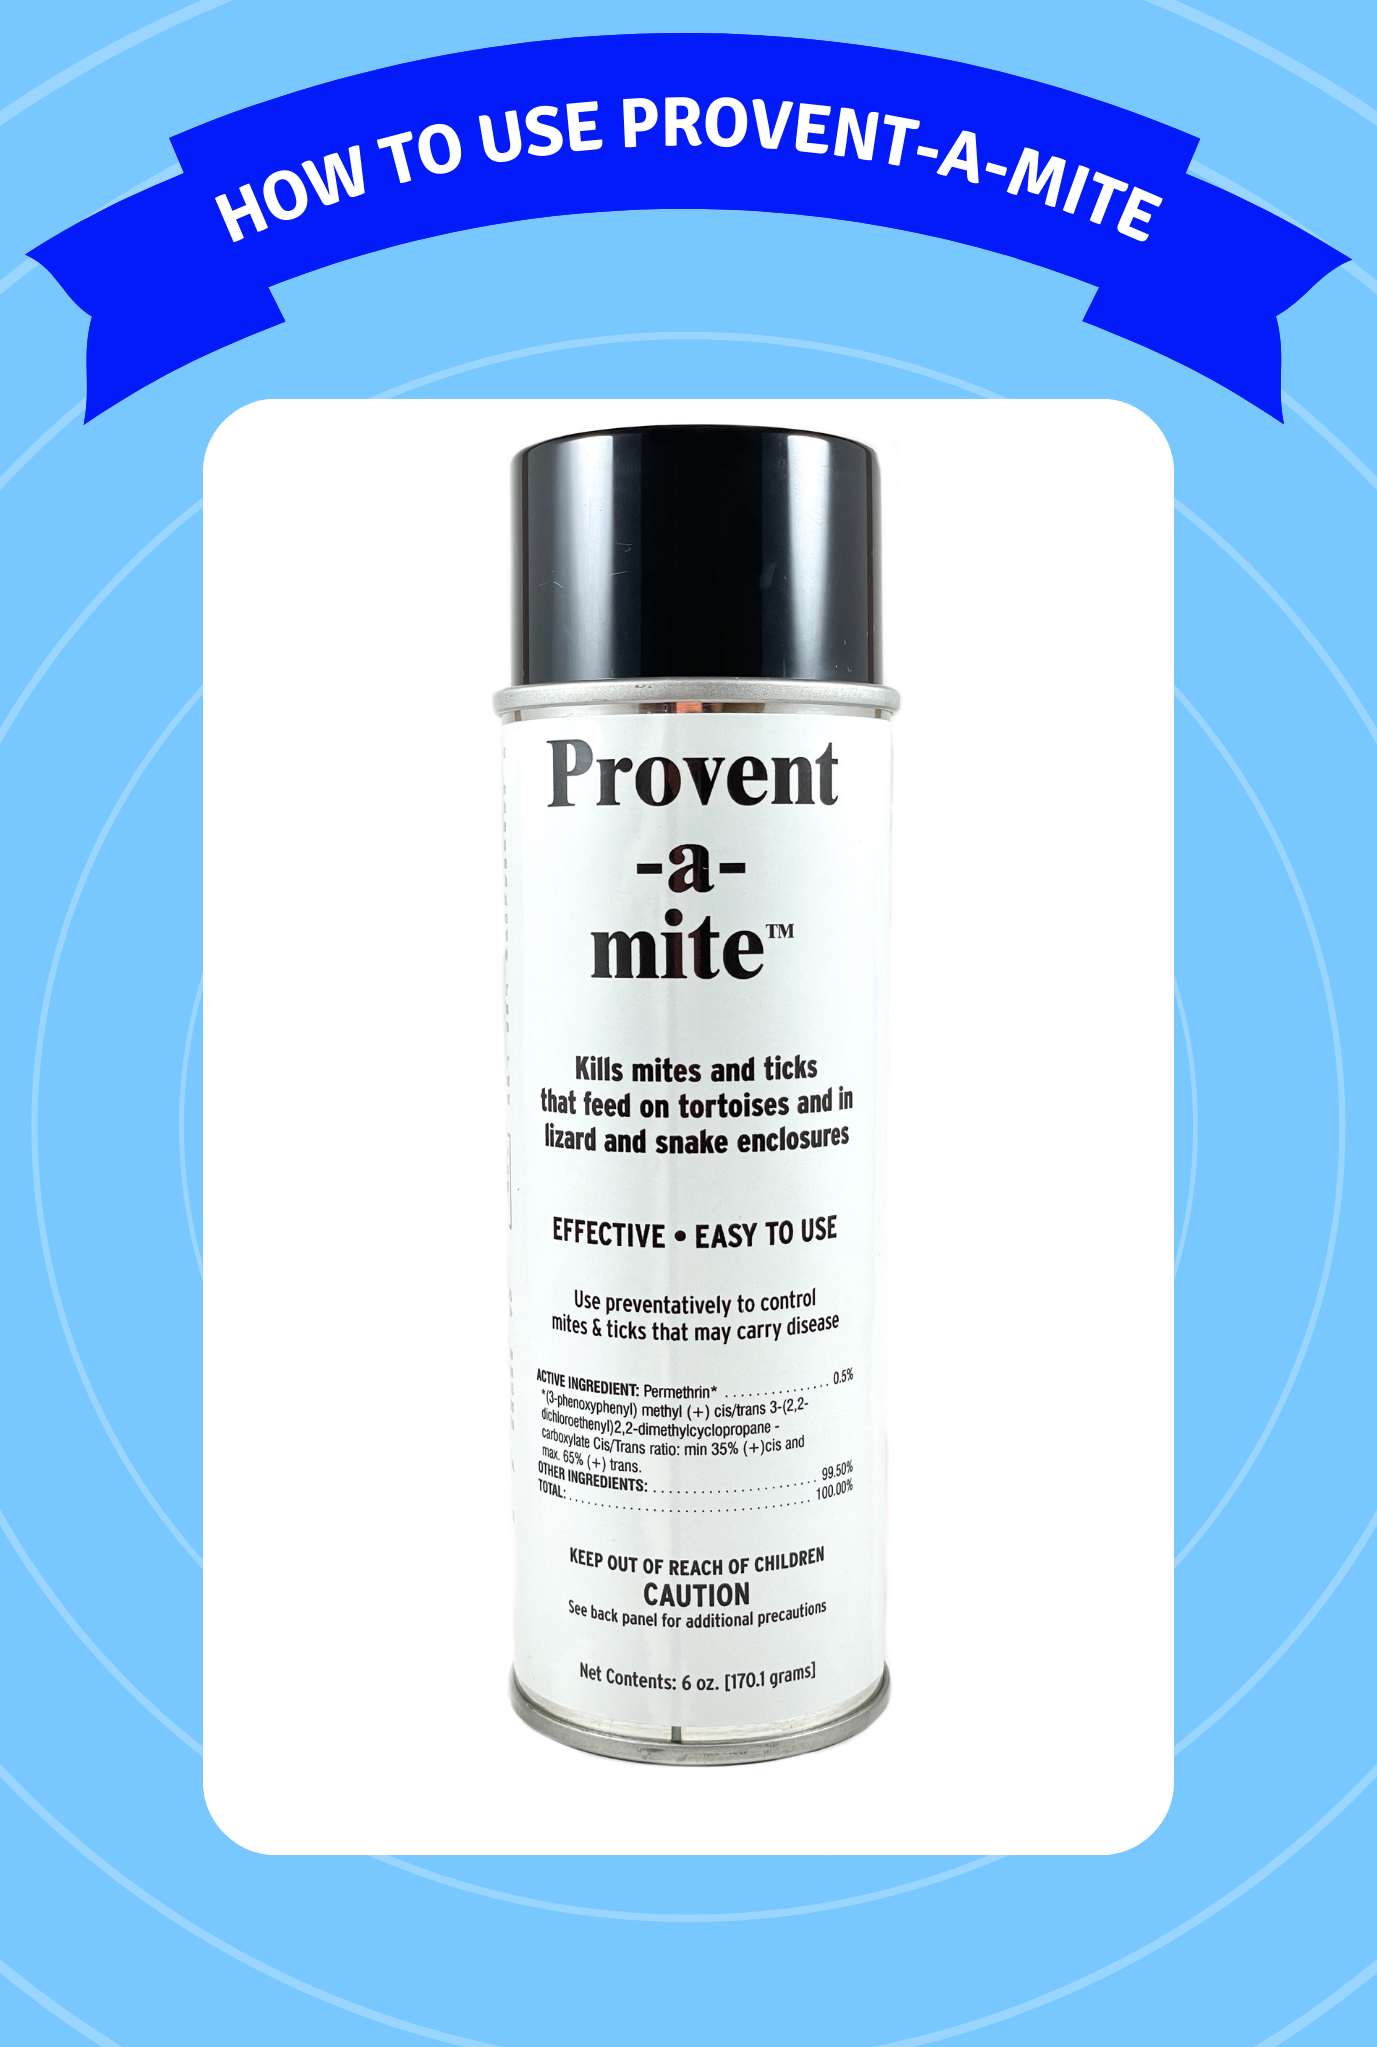 How to use Provent-A-Mite